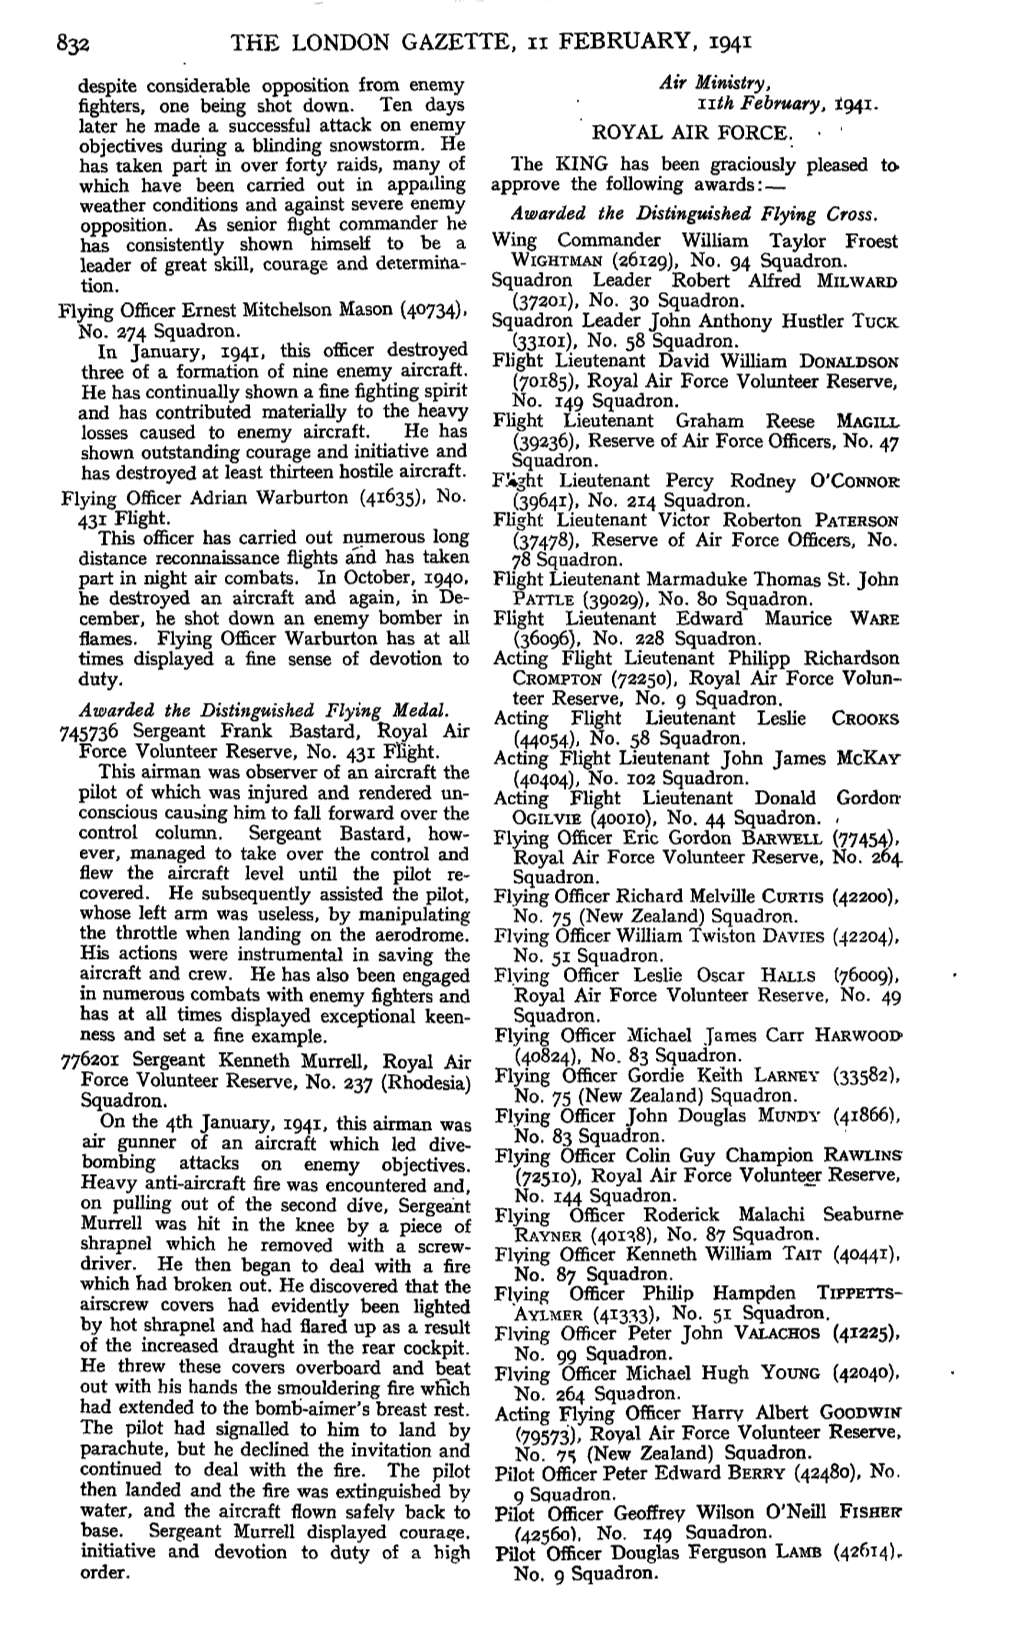 832 the LONDON GAZETTE, N FEBRUARY, 1941 Despite Considerable Opposition from Enemy Air Ministry, Fighters, One Being Shot Down